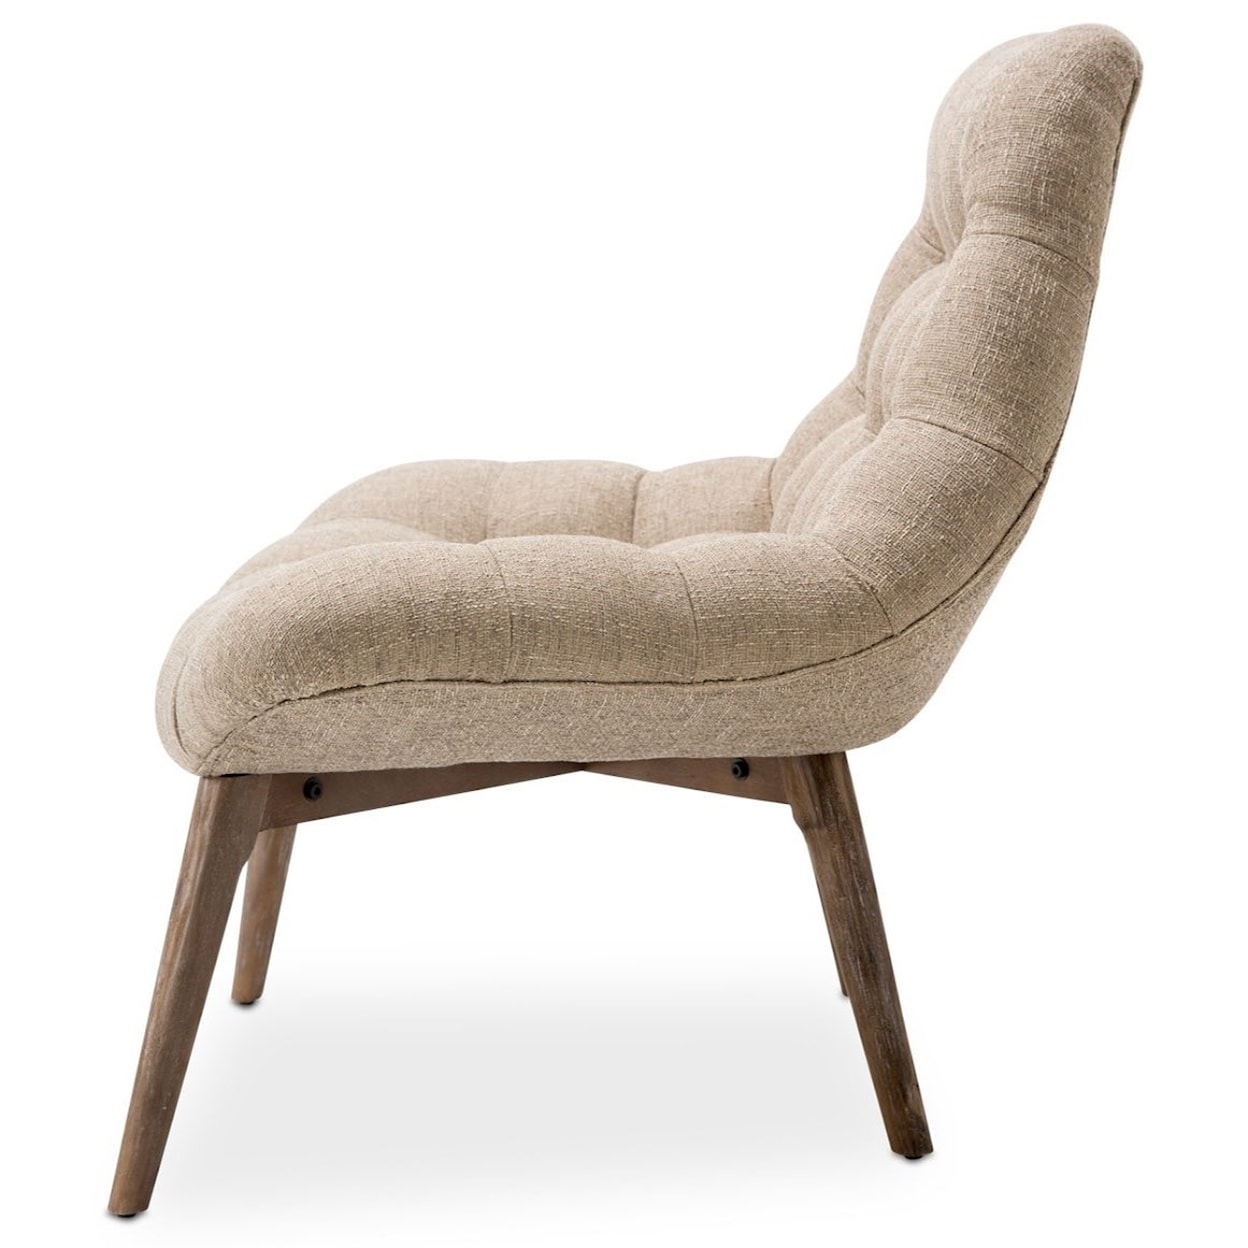 Michael Amini Bayside Tufted Accent Chair